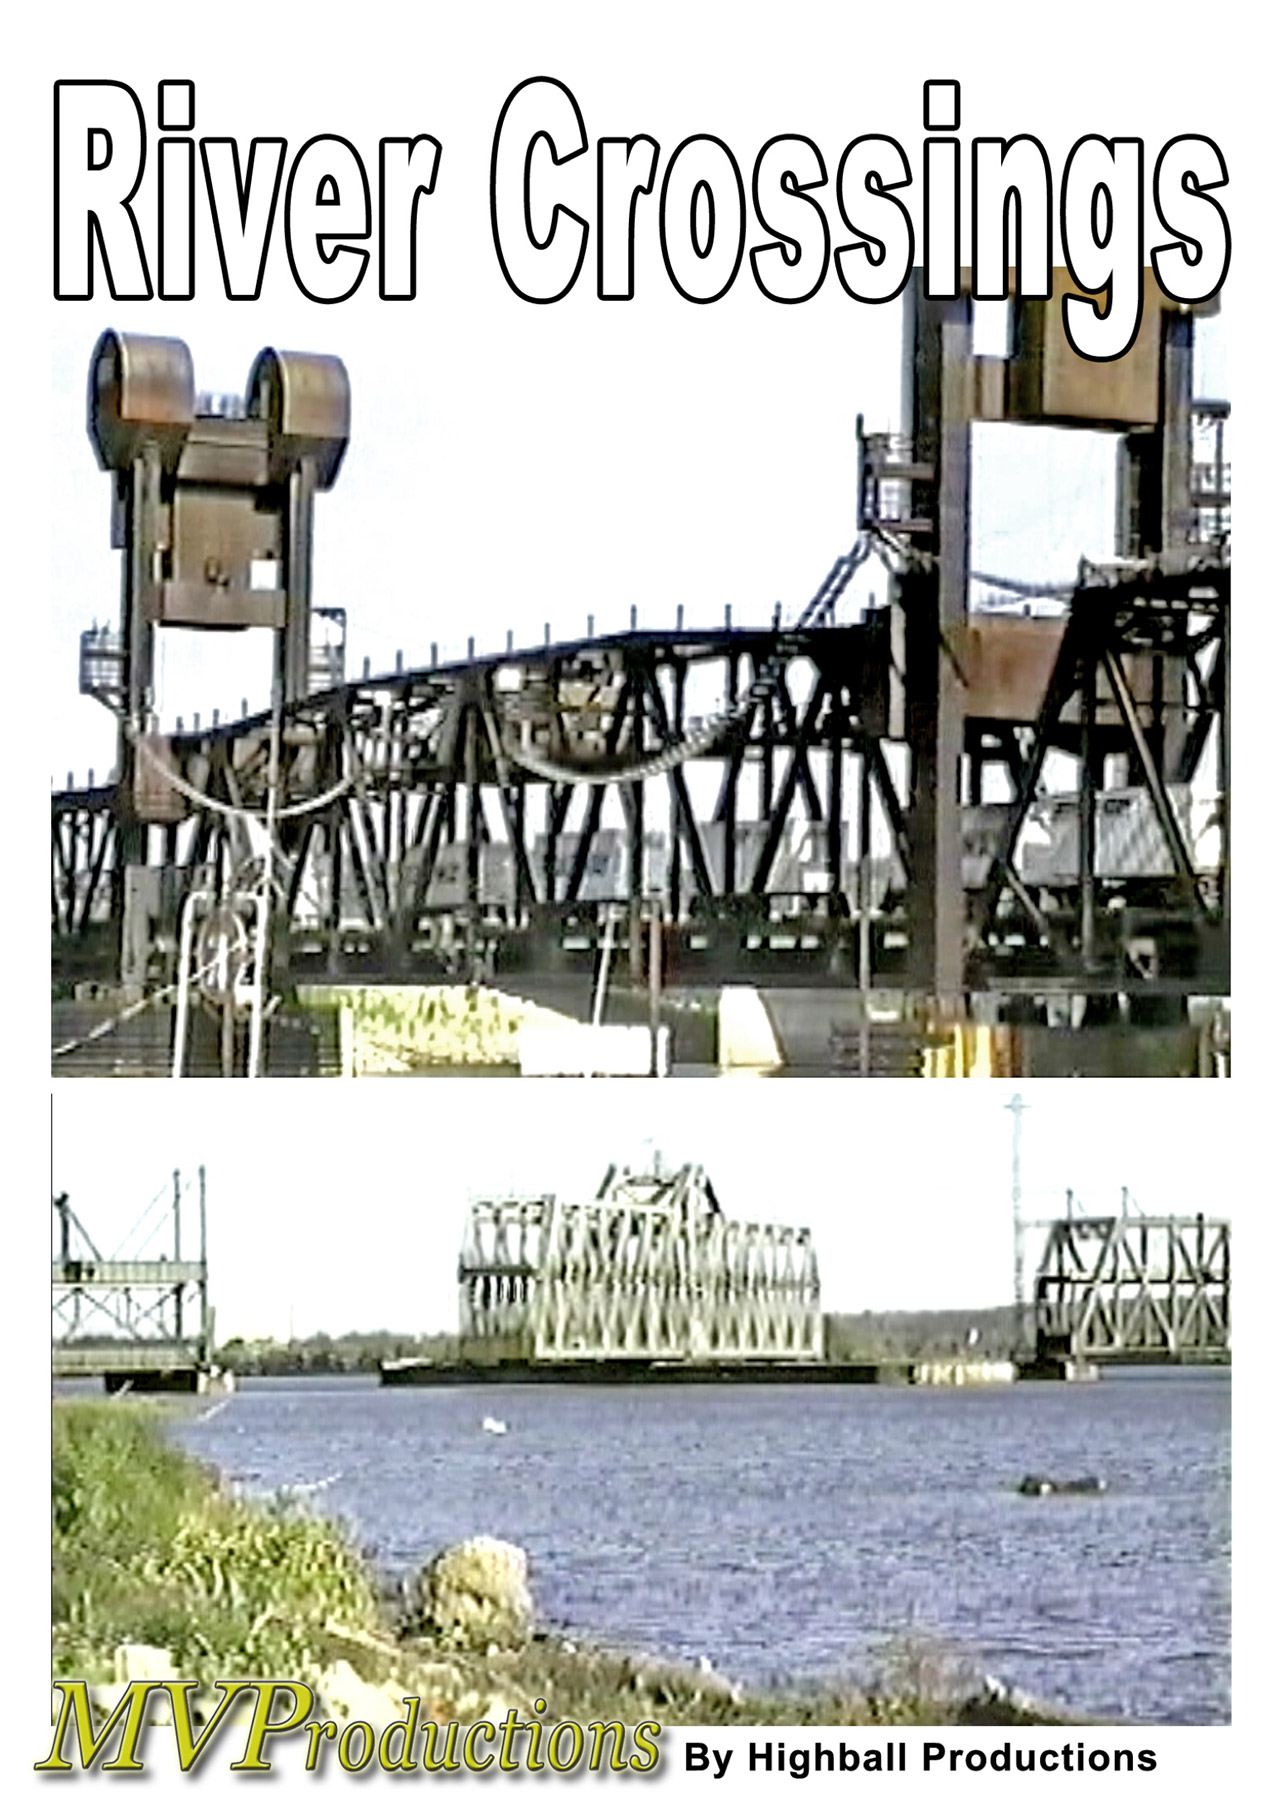 River Crossings Midwest Video Productions MVRC 601577879961